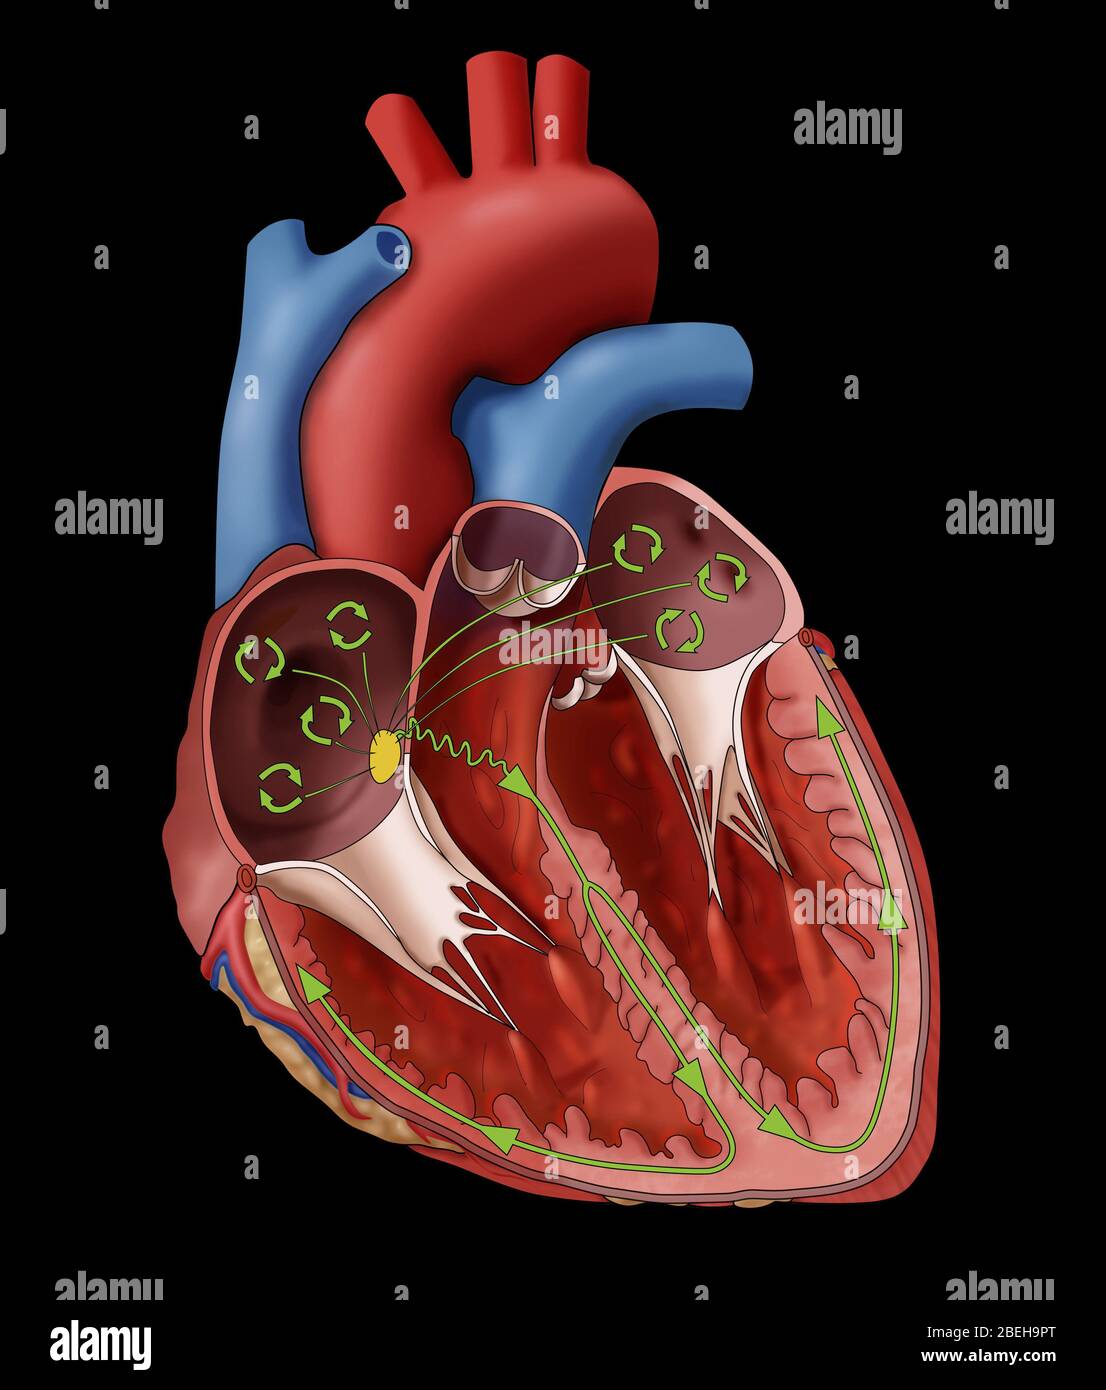 Illustration showing a heart with atrial fibrillation (AFib), a heart rhythm abnormality. As shown here, the electrical impulses (green circles) are spread through the atria in a chaotic fashion causing the heart to beat in a rapid disorganized manner. Stock Photo